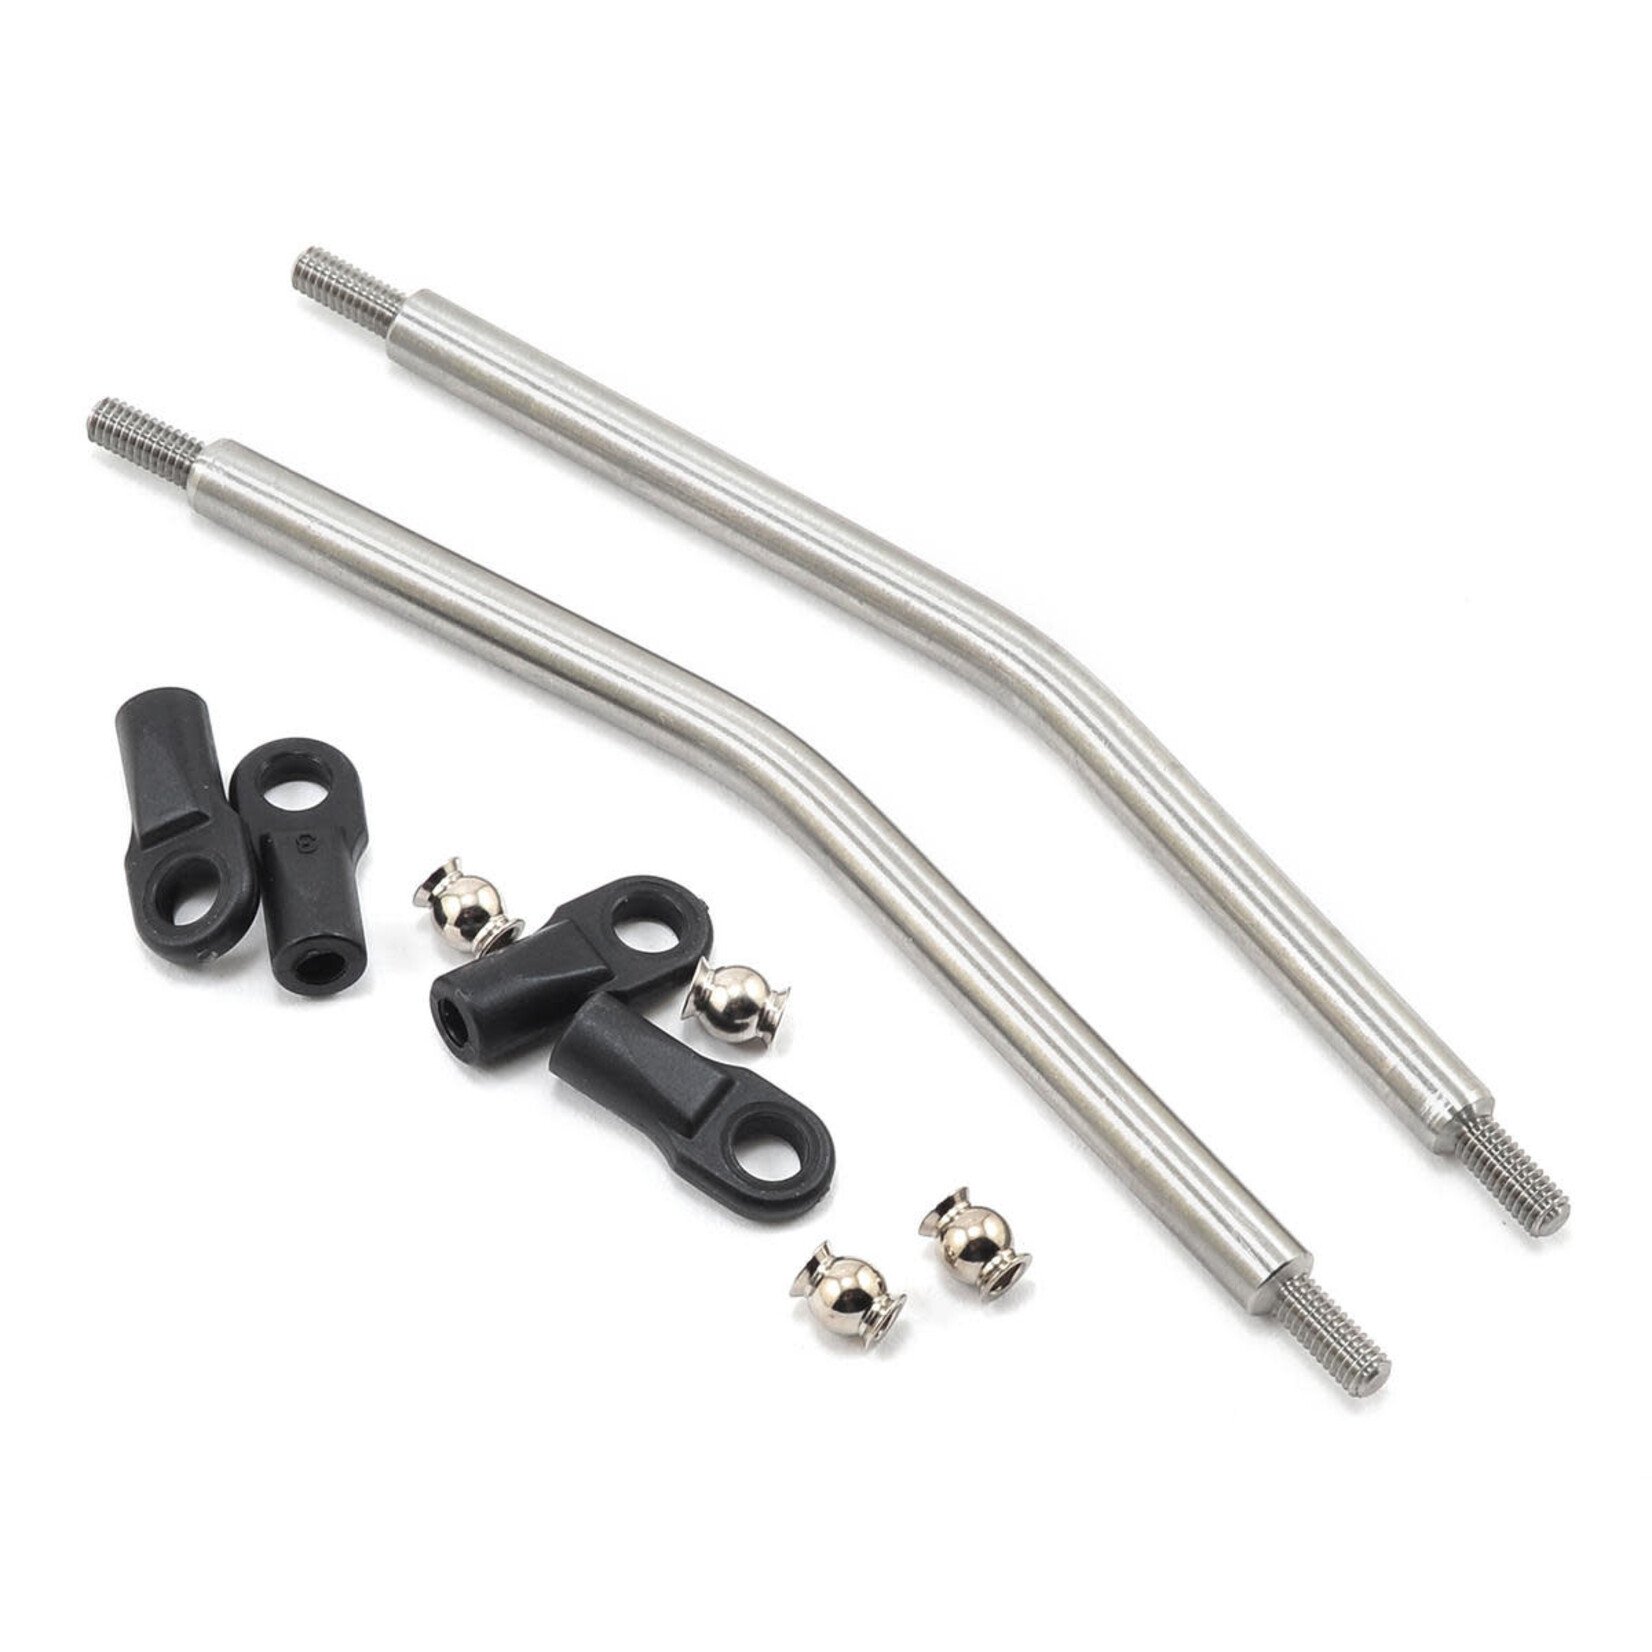 Incision Incision Yeti 1/4 Stainless Steel Rear Upper Suspension Links (2) #IRC00051